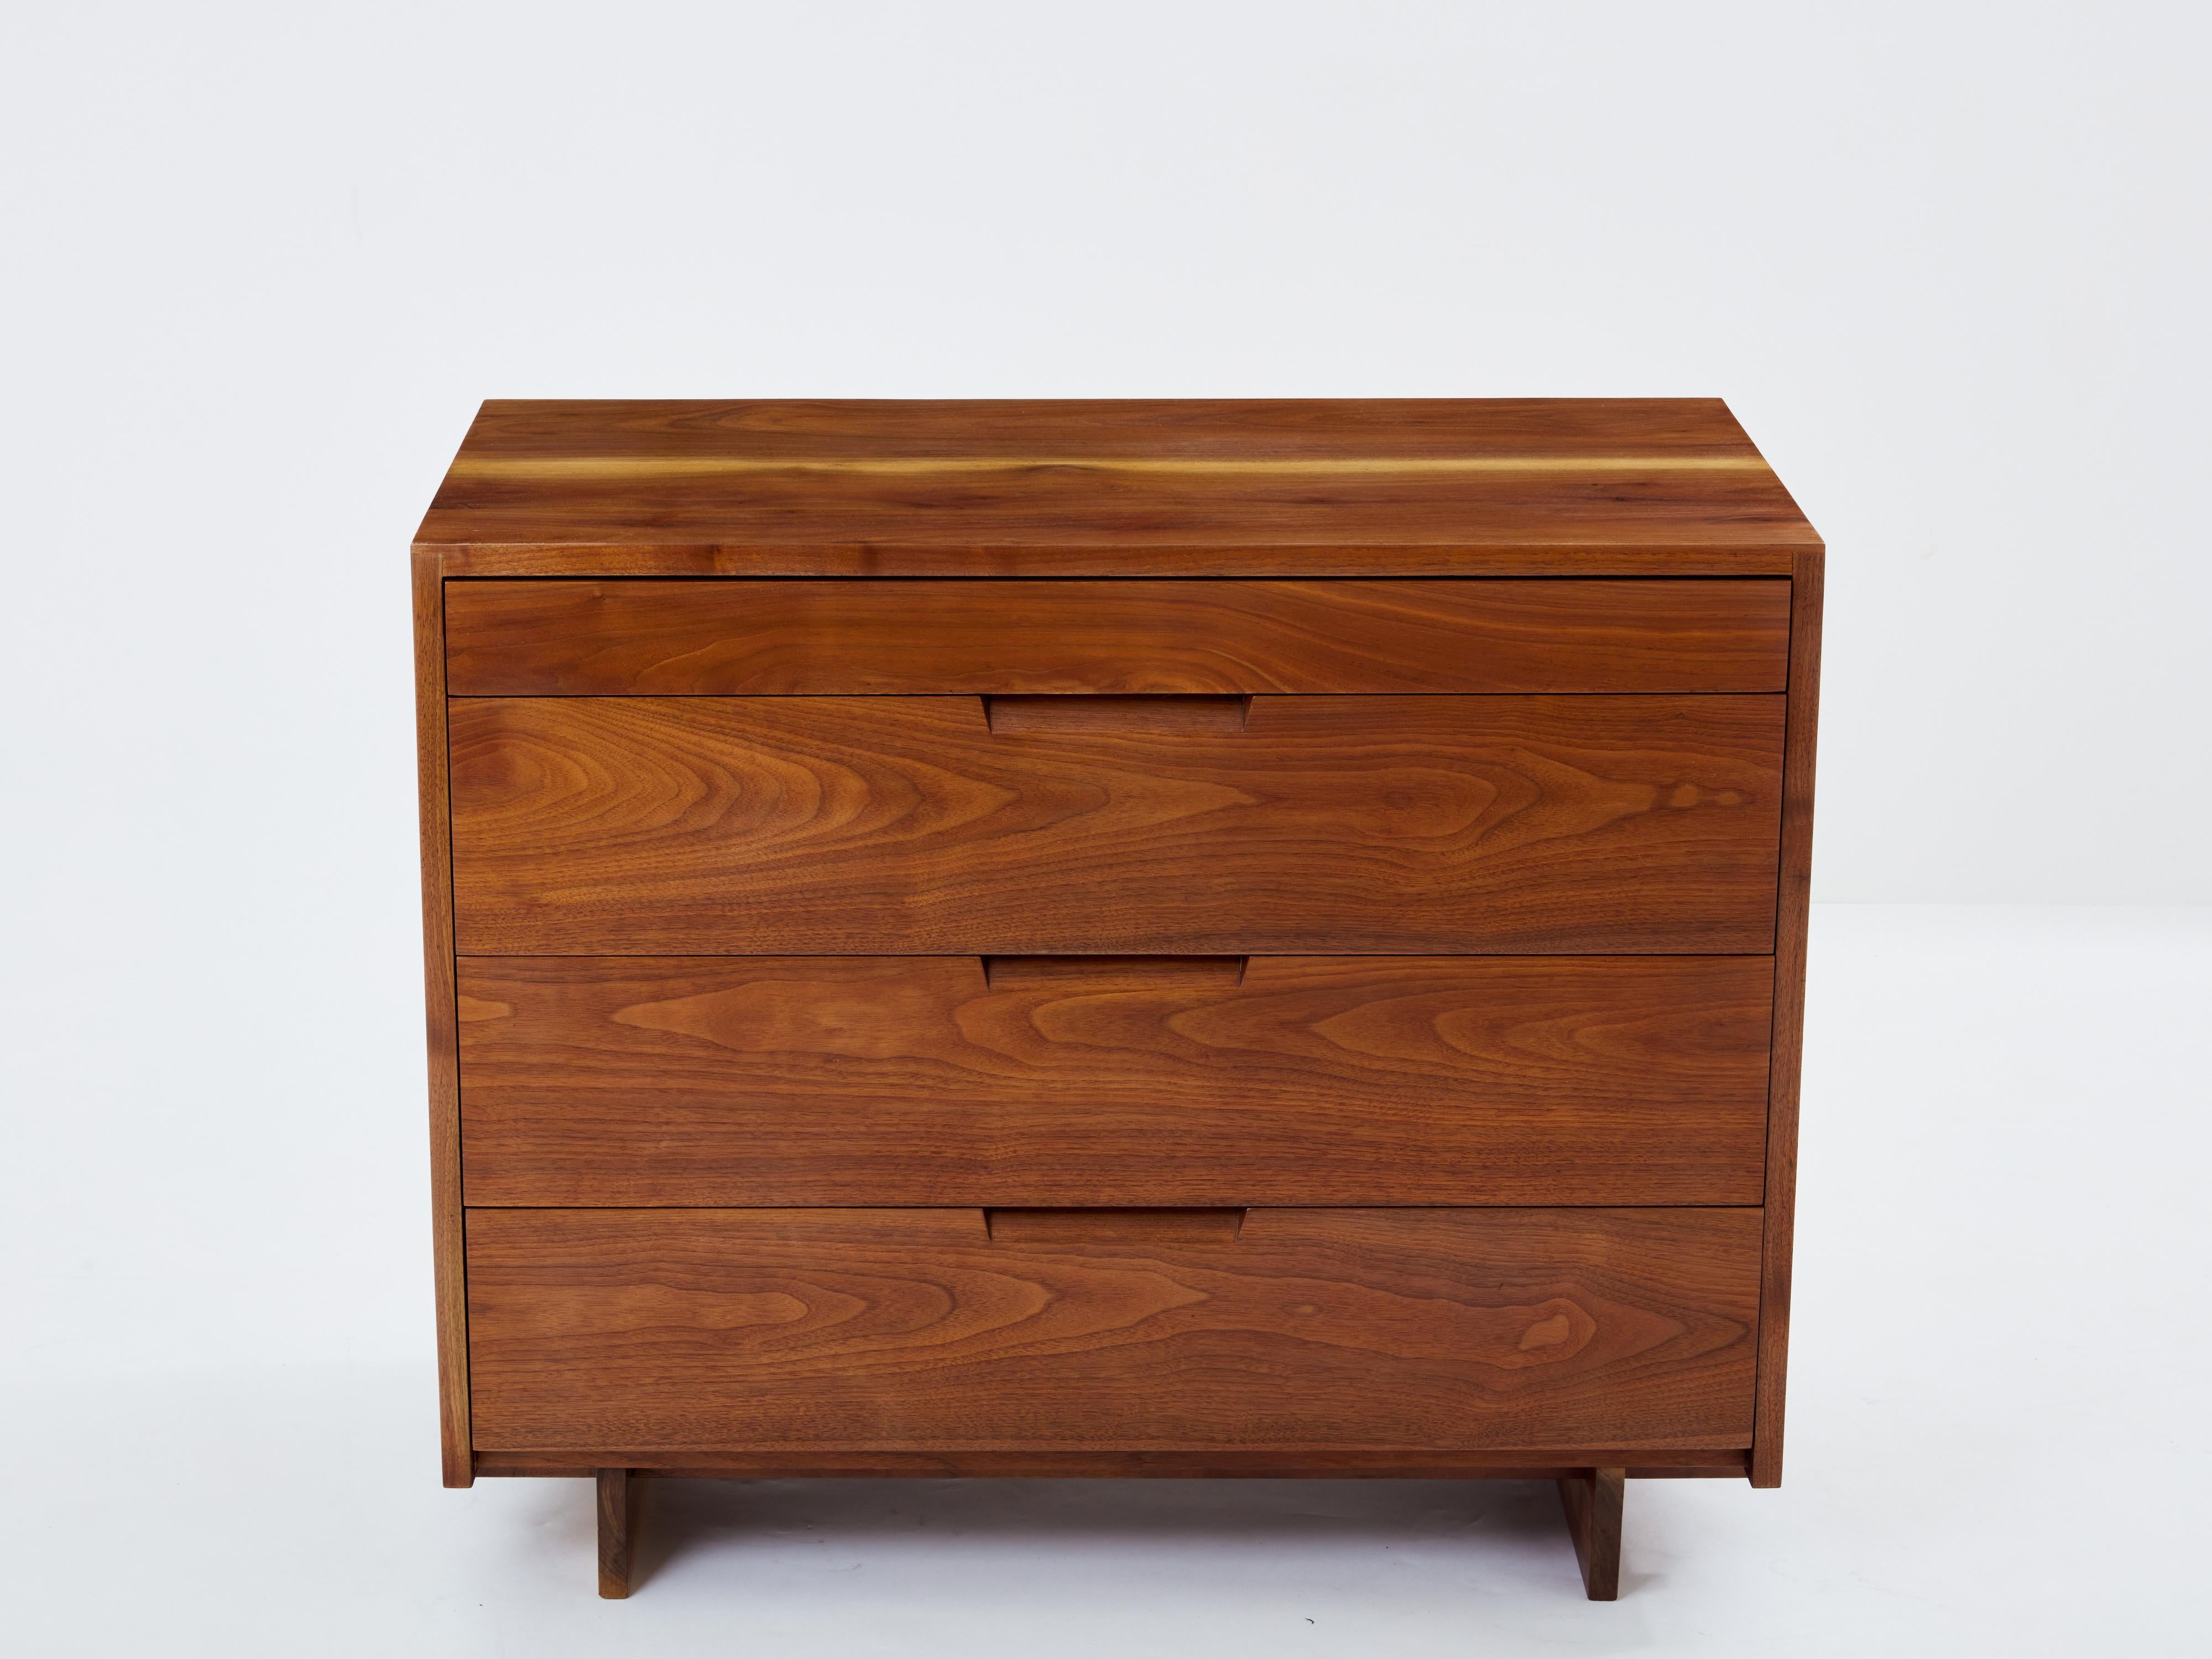 This dresser crafted from American black walnut is a stunning testament to George Nakashima's craftsmanship. Created upon the request of a private client in 1955, the angular shapes of the piece and its sleek structure allow the wood, Nakashima's